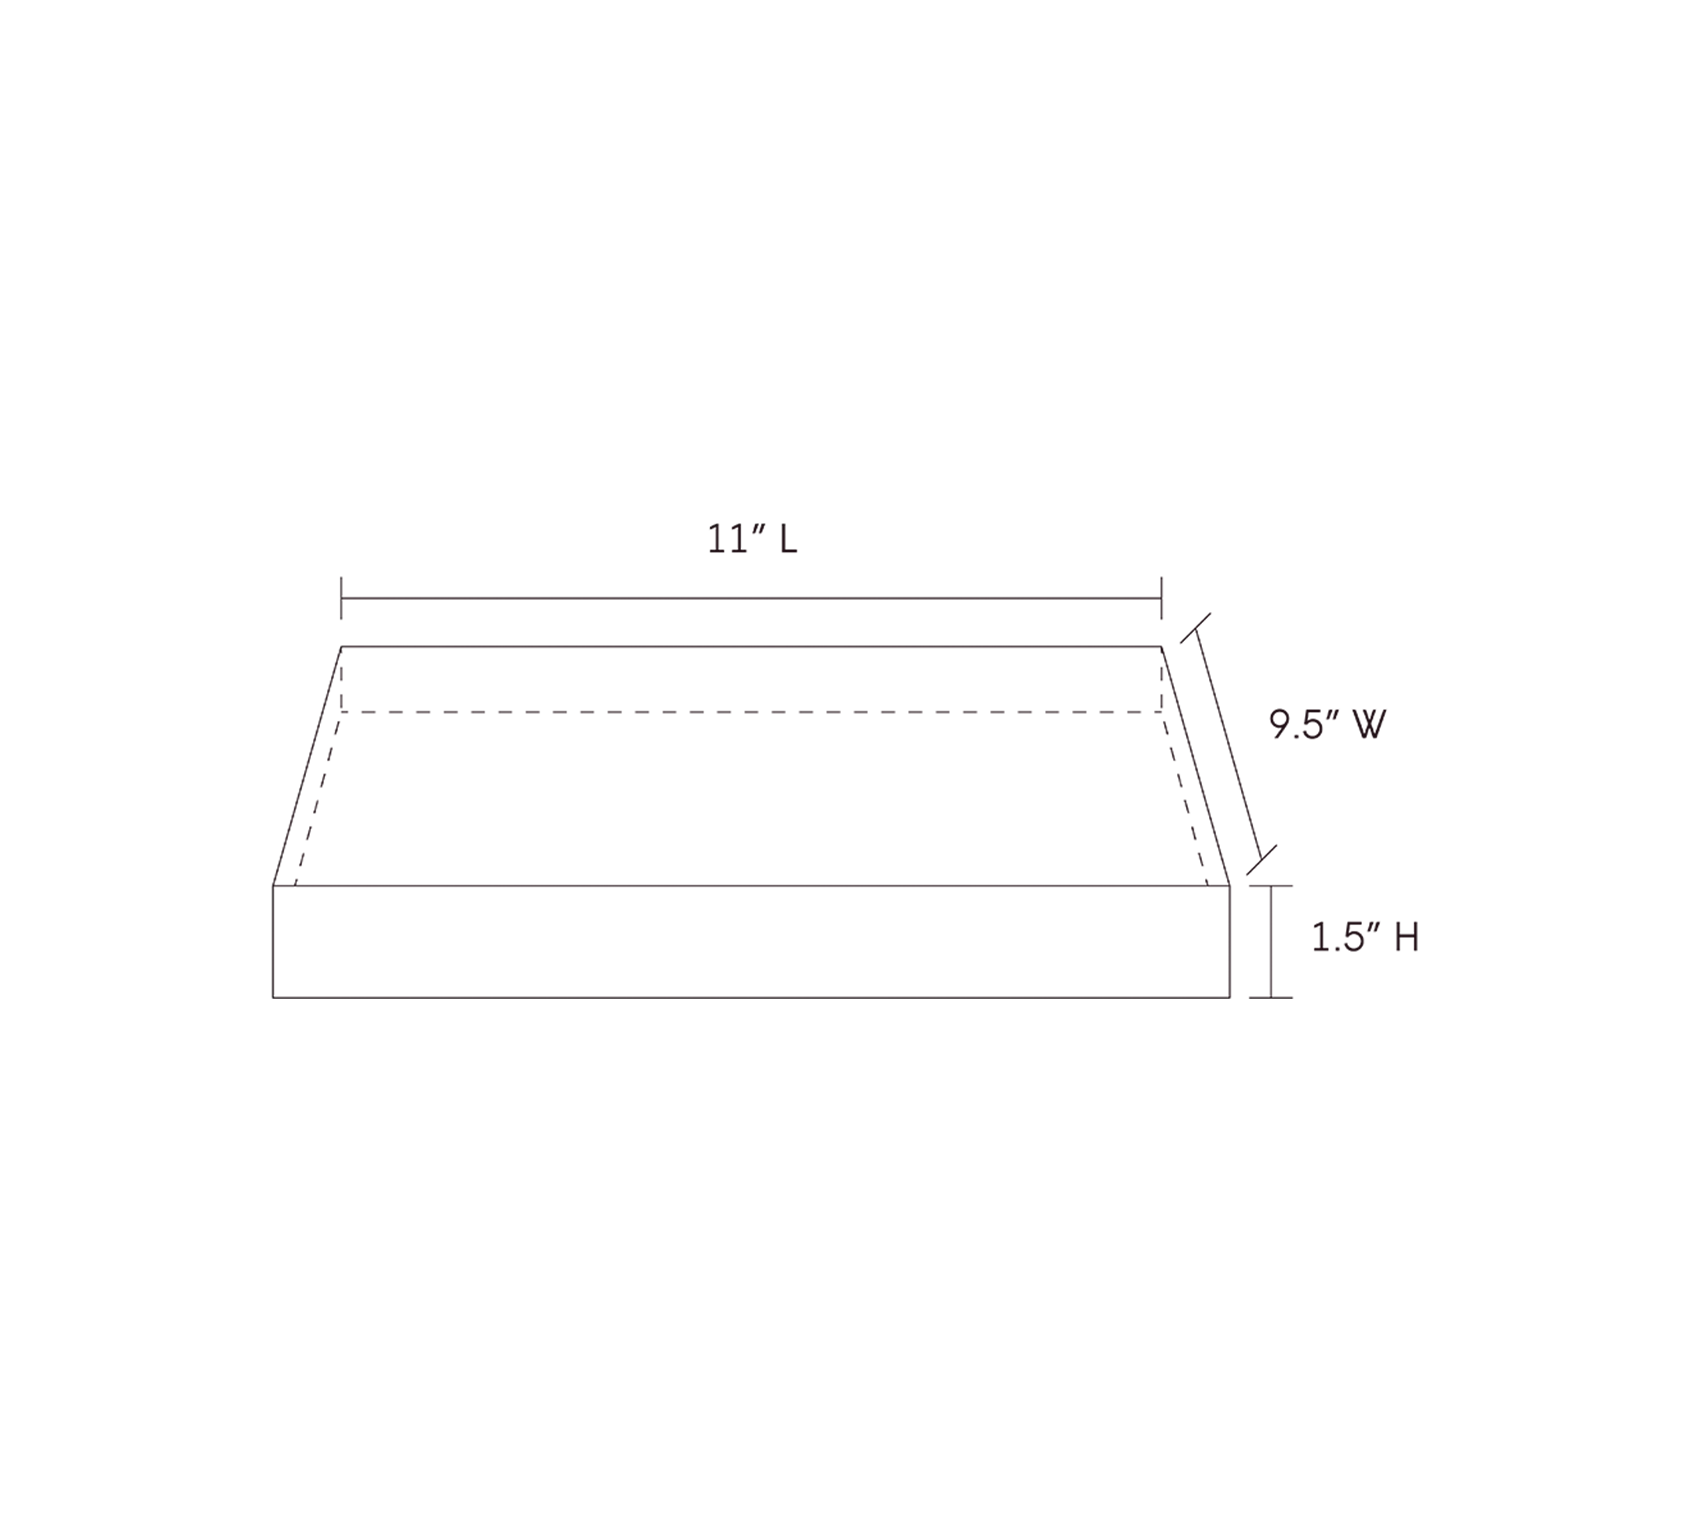 Line drawing of the Single Space Tray with dimensions of 11 inches in length, 9.5 inches in width, and 1.5 inches in height